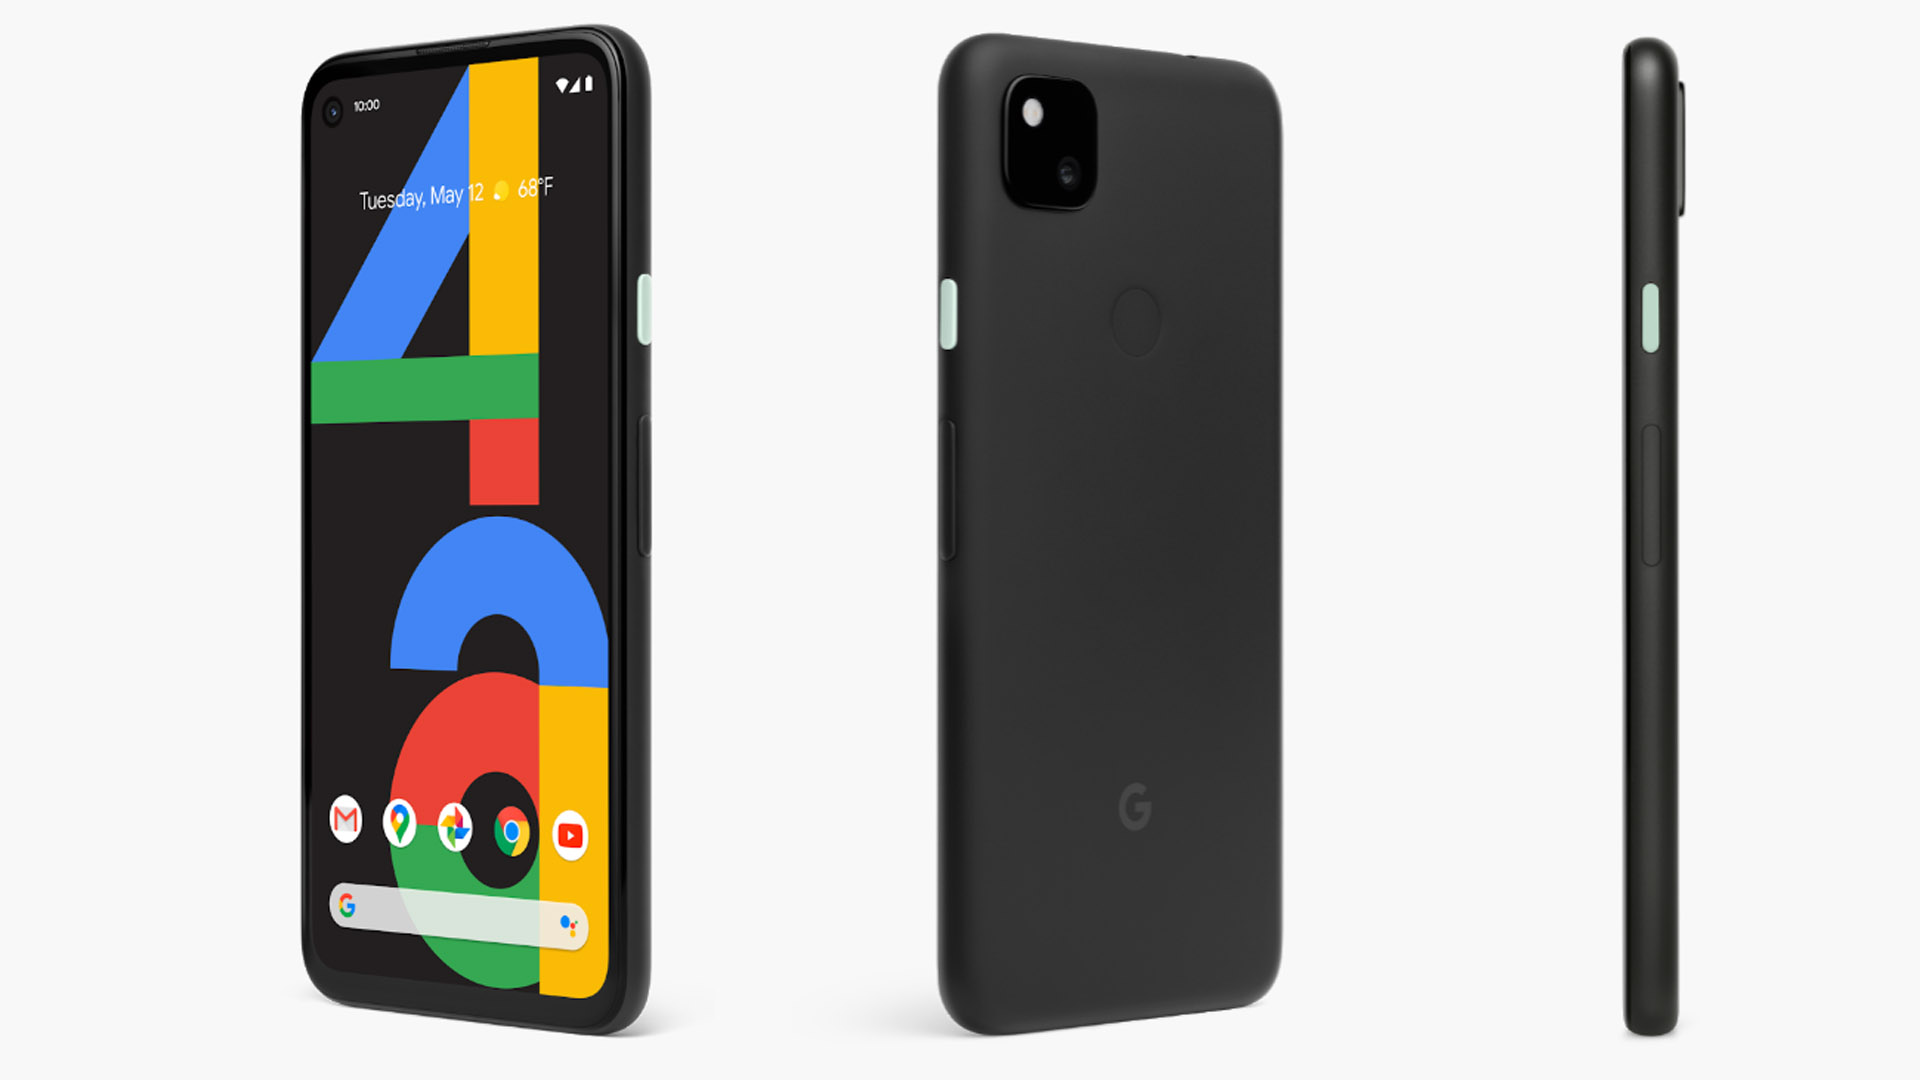 Google Officially Pronounces the Pixel 4a, Teases the Pixel 5 and 4a 5G for Later